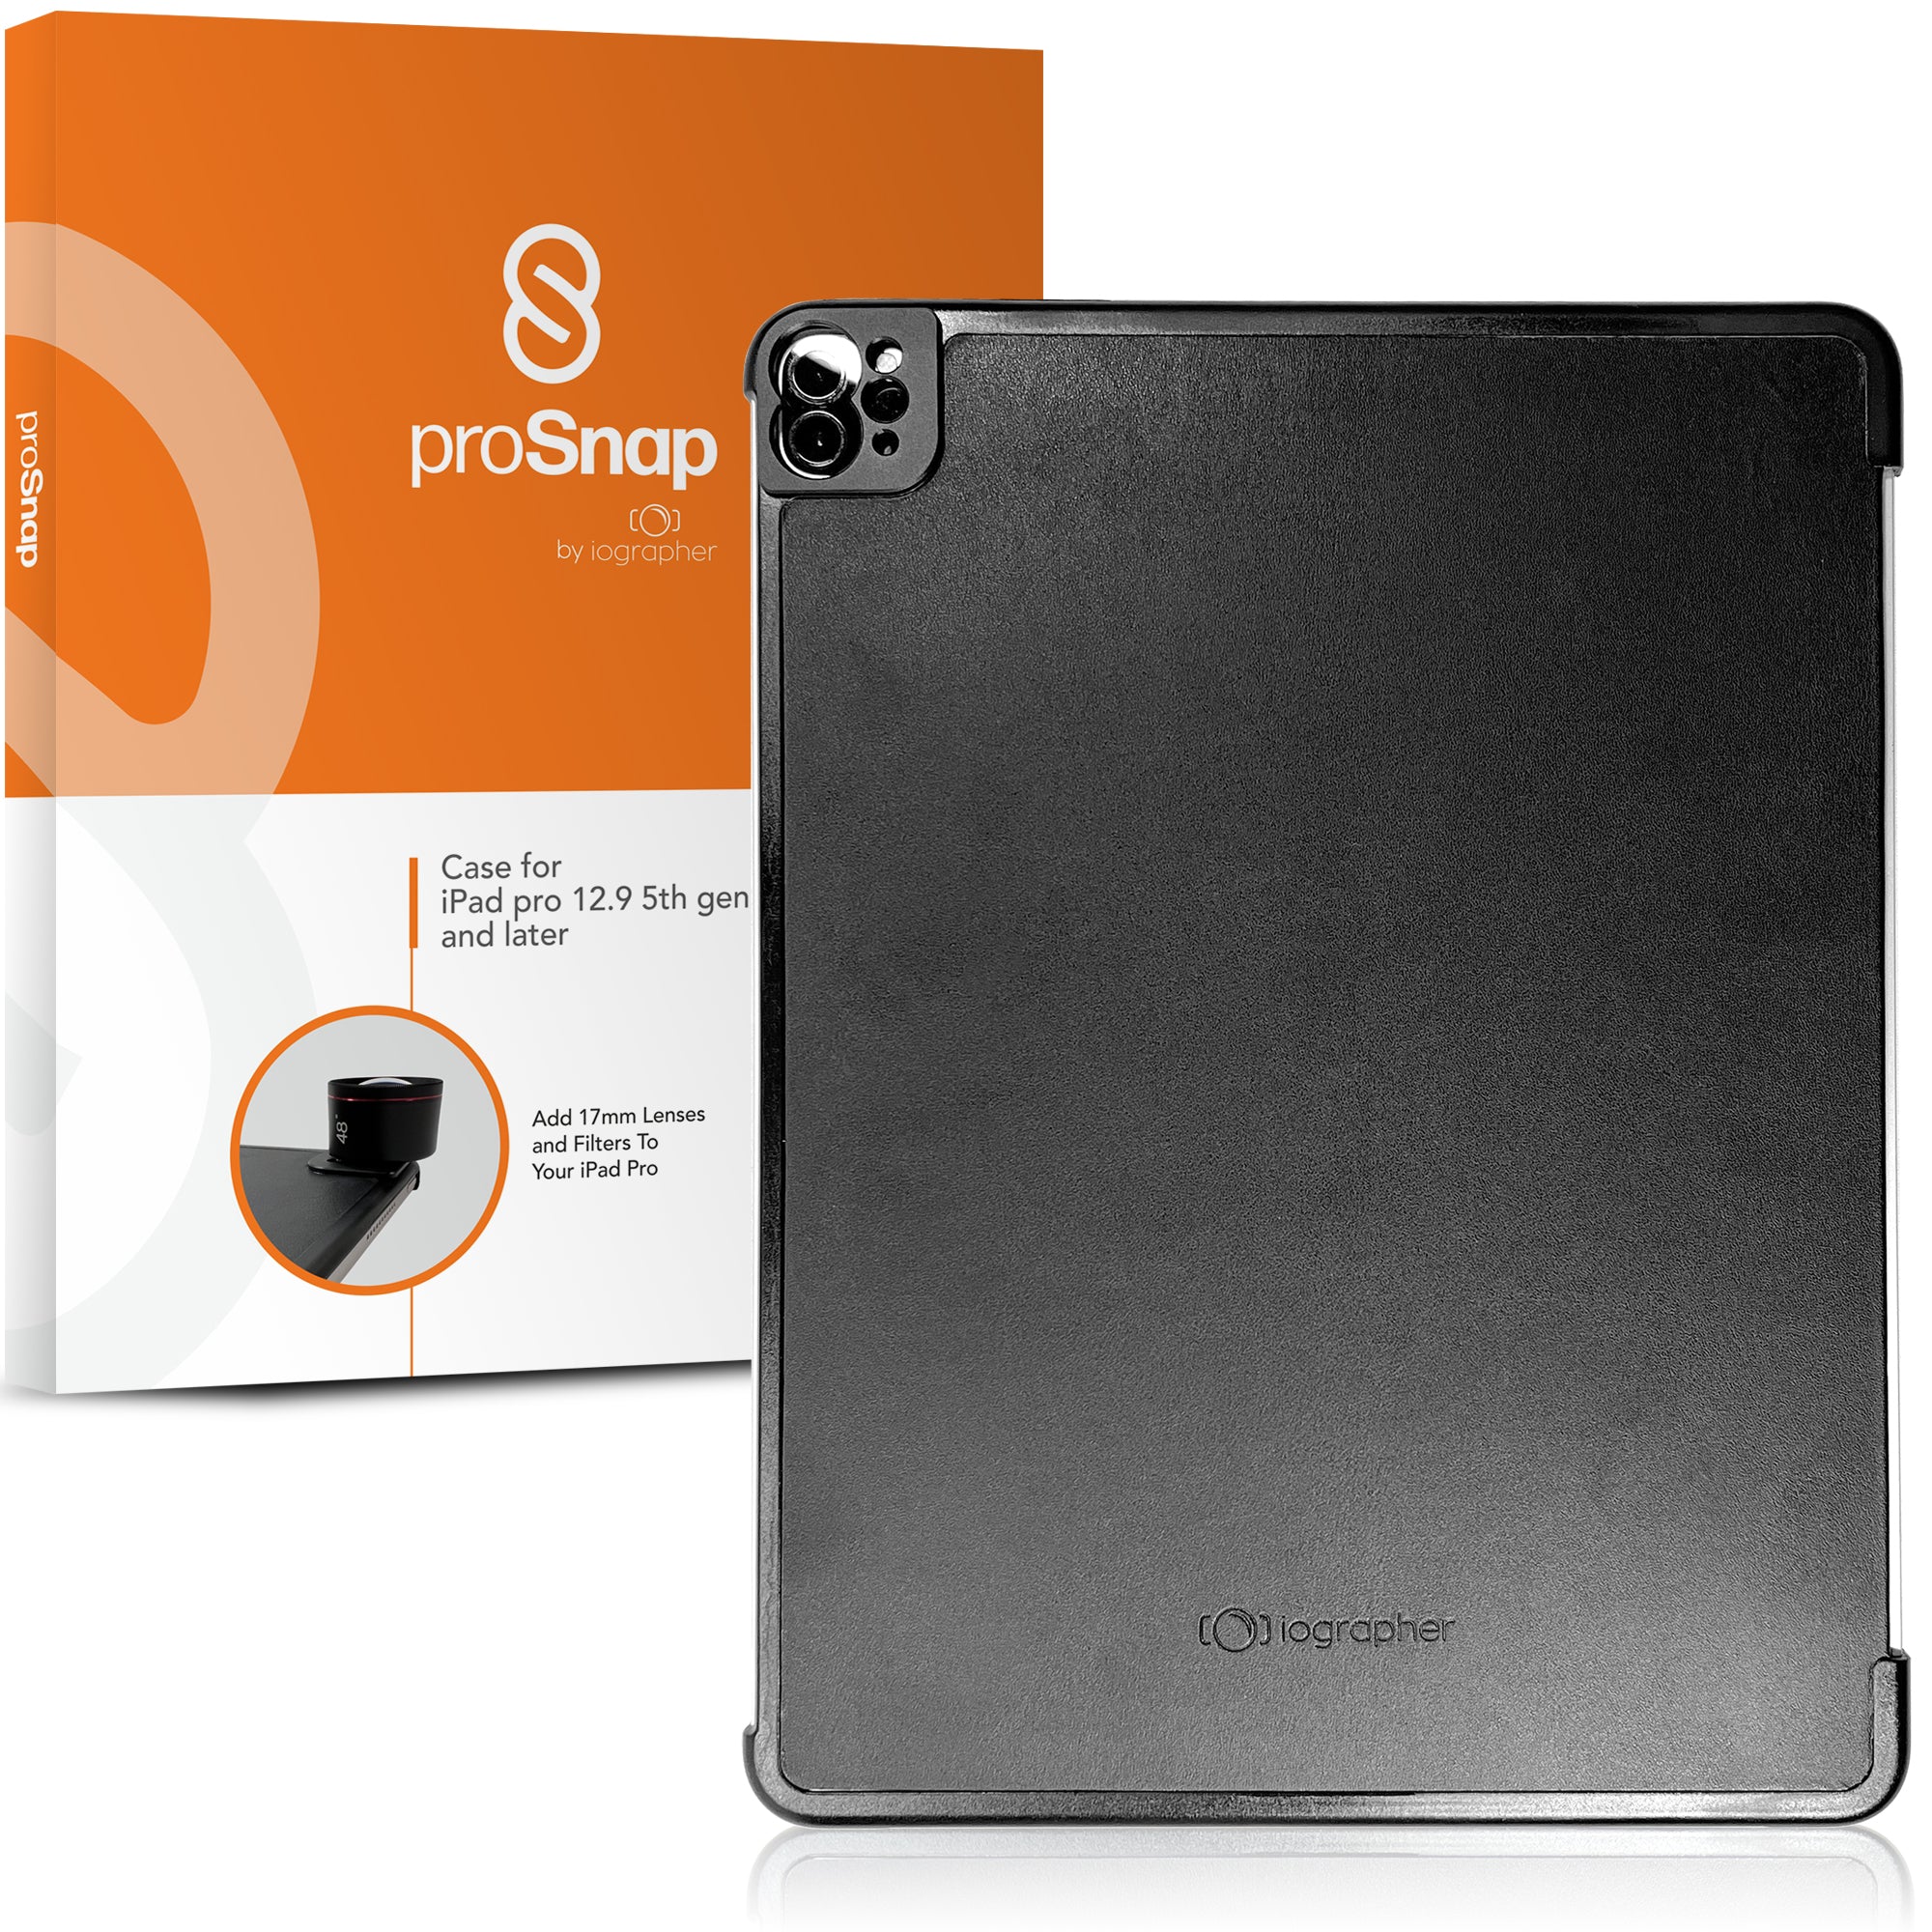 iOgrapher proSnap iPad Case | Compatible with iPad 12.9 Pro 4th, 5th, and 6th Gen